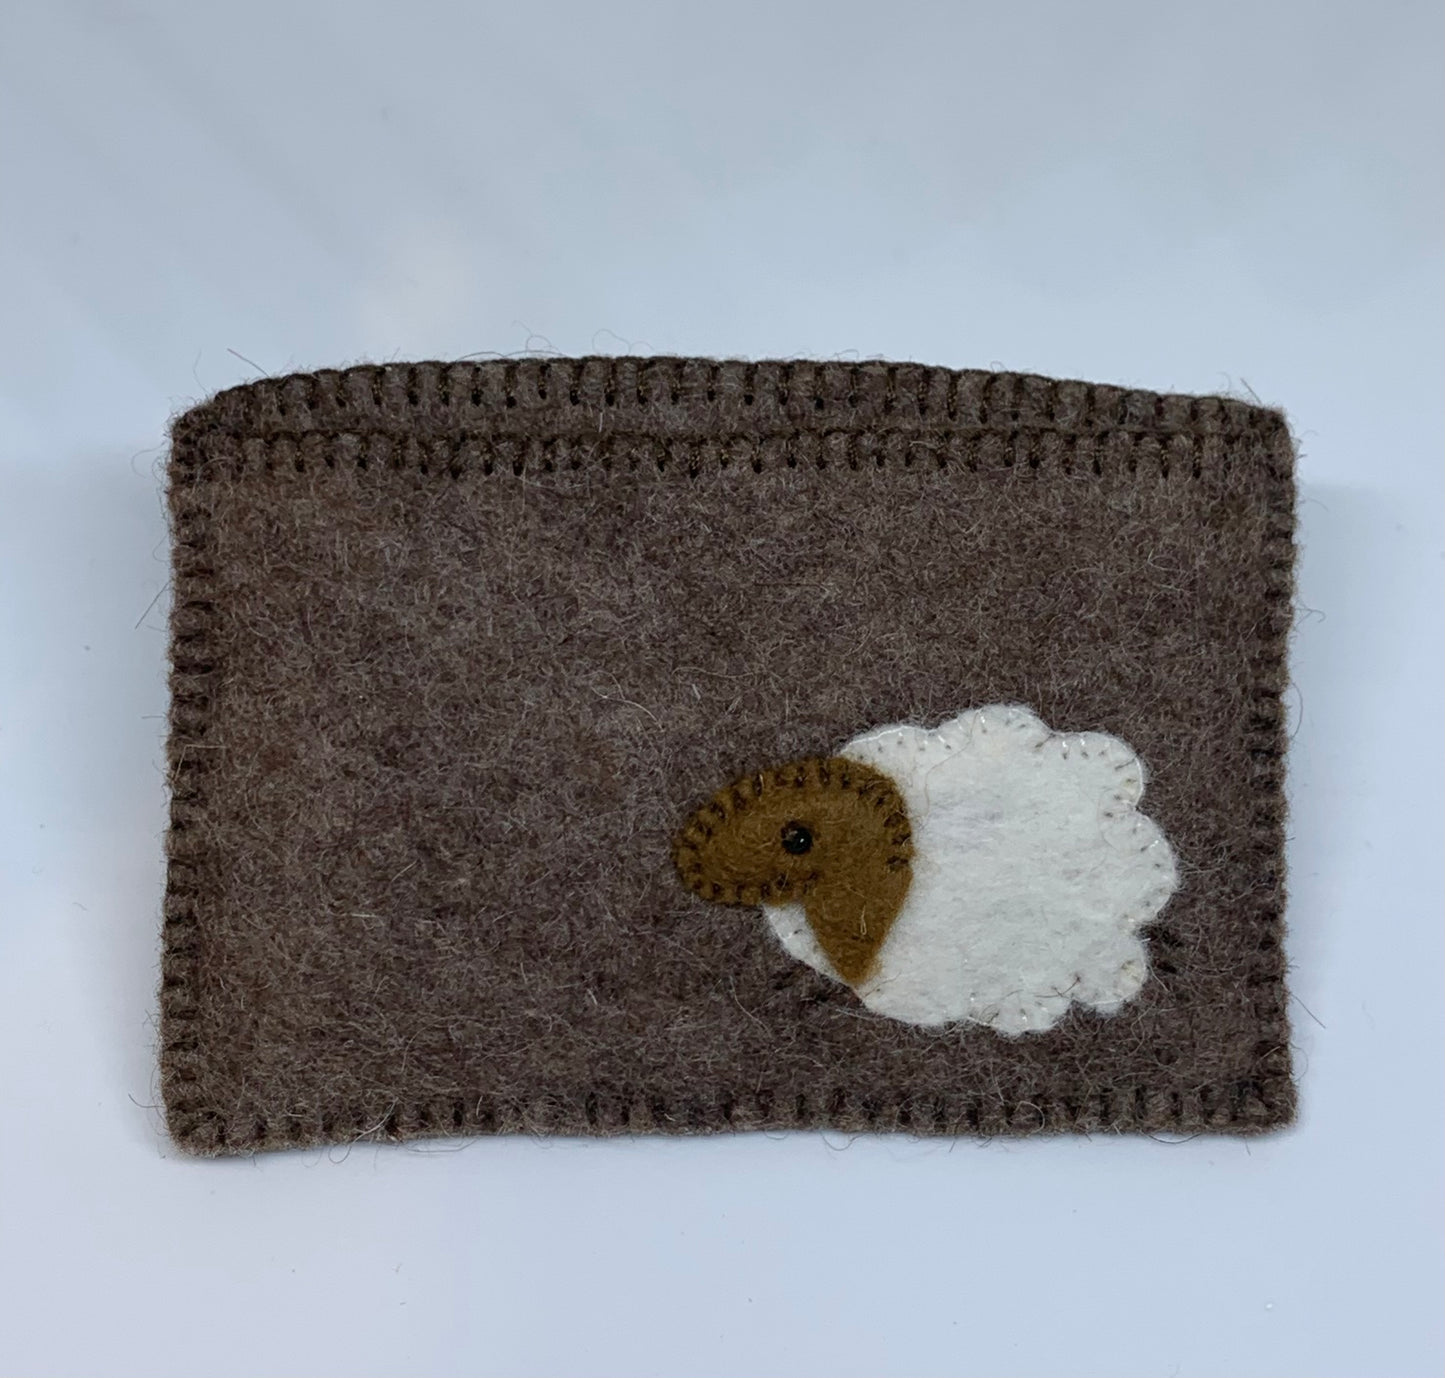 *Gift Idea - Card Holder with Sheep Ornament (S$20)